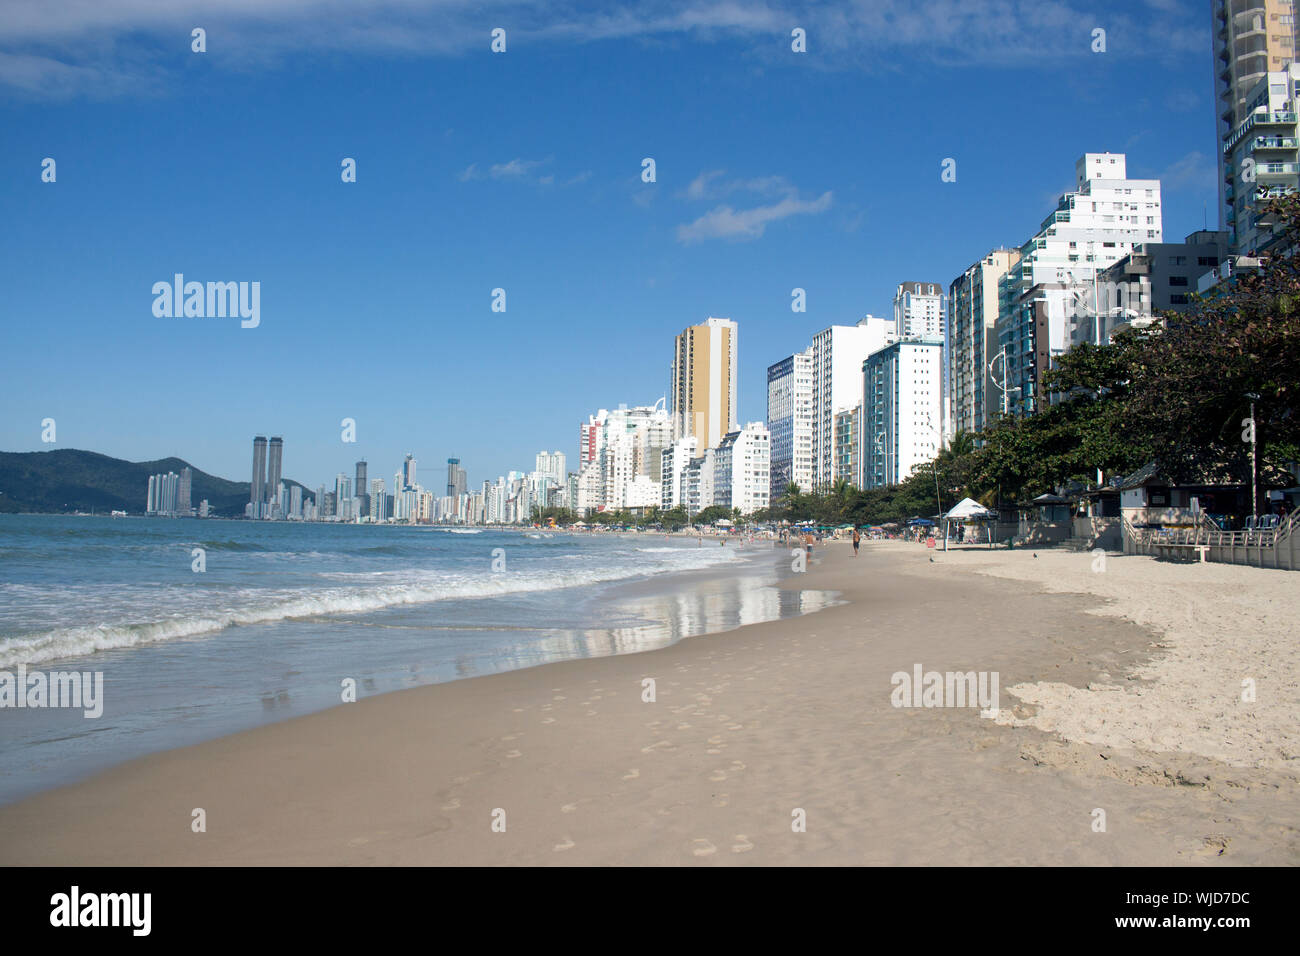 Balneario Camburiú presents the second largest verticalization in Brazil, with 57% of the occupied households being vertical. S. Catarina - Brazil Stock Photo